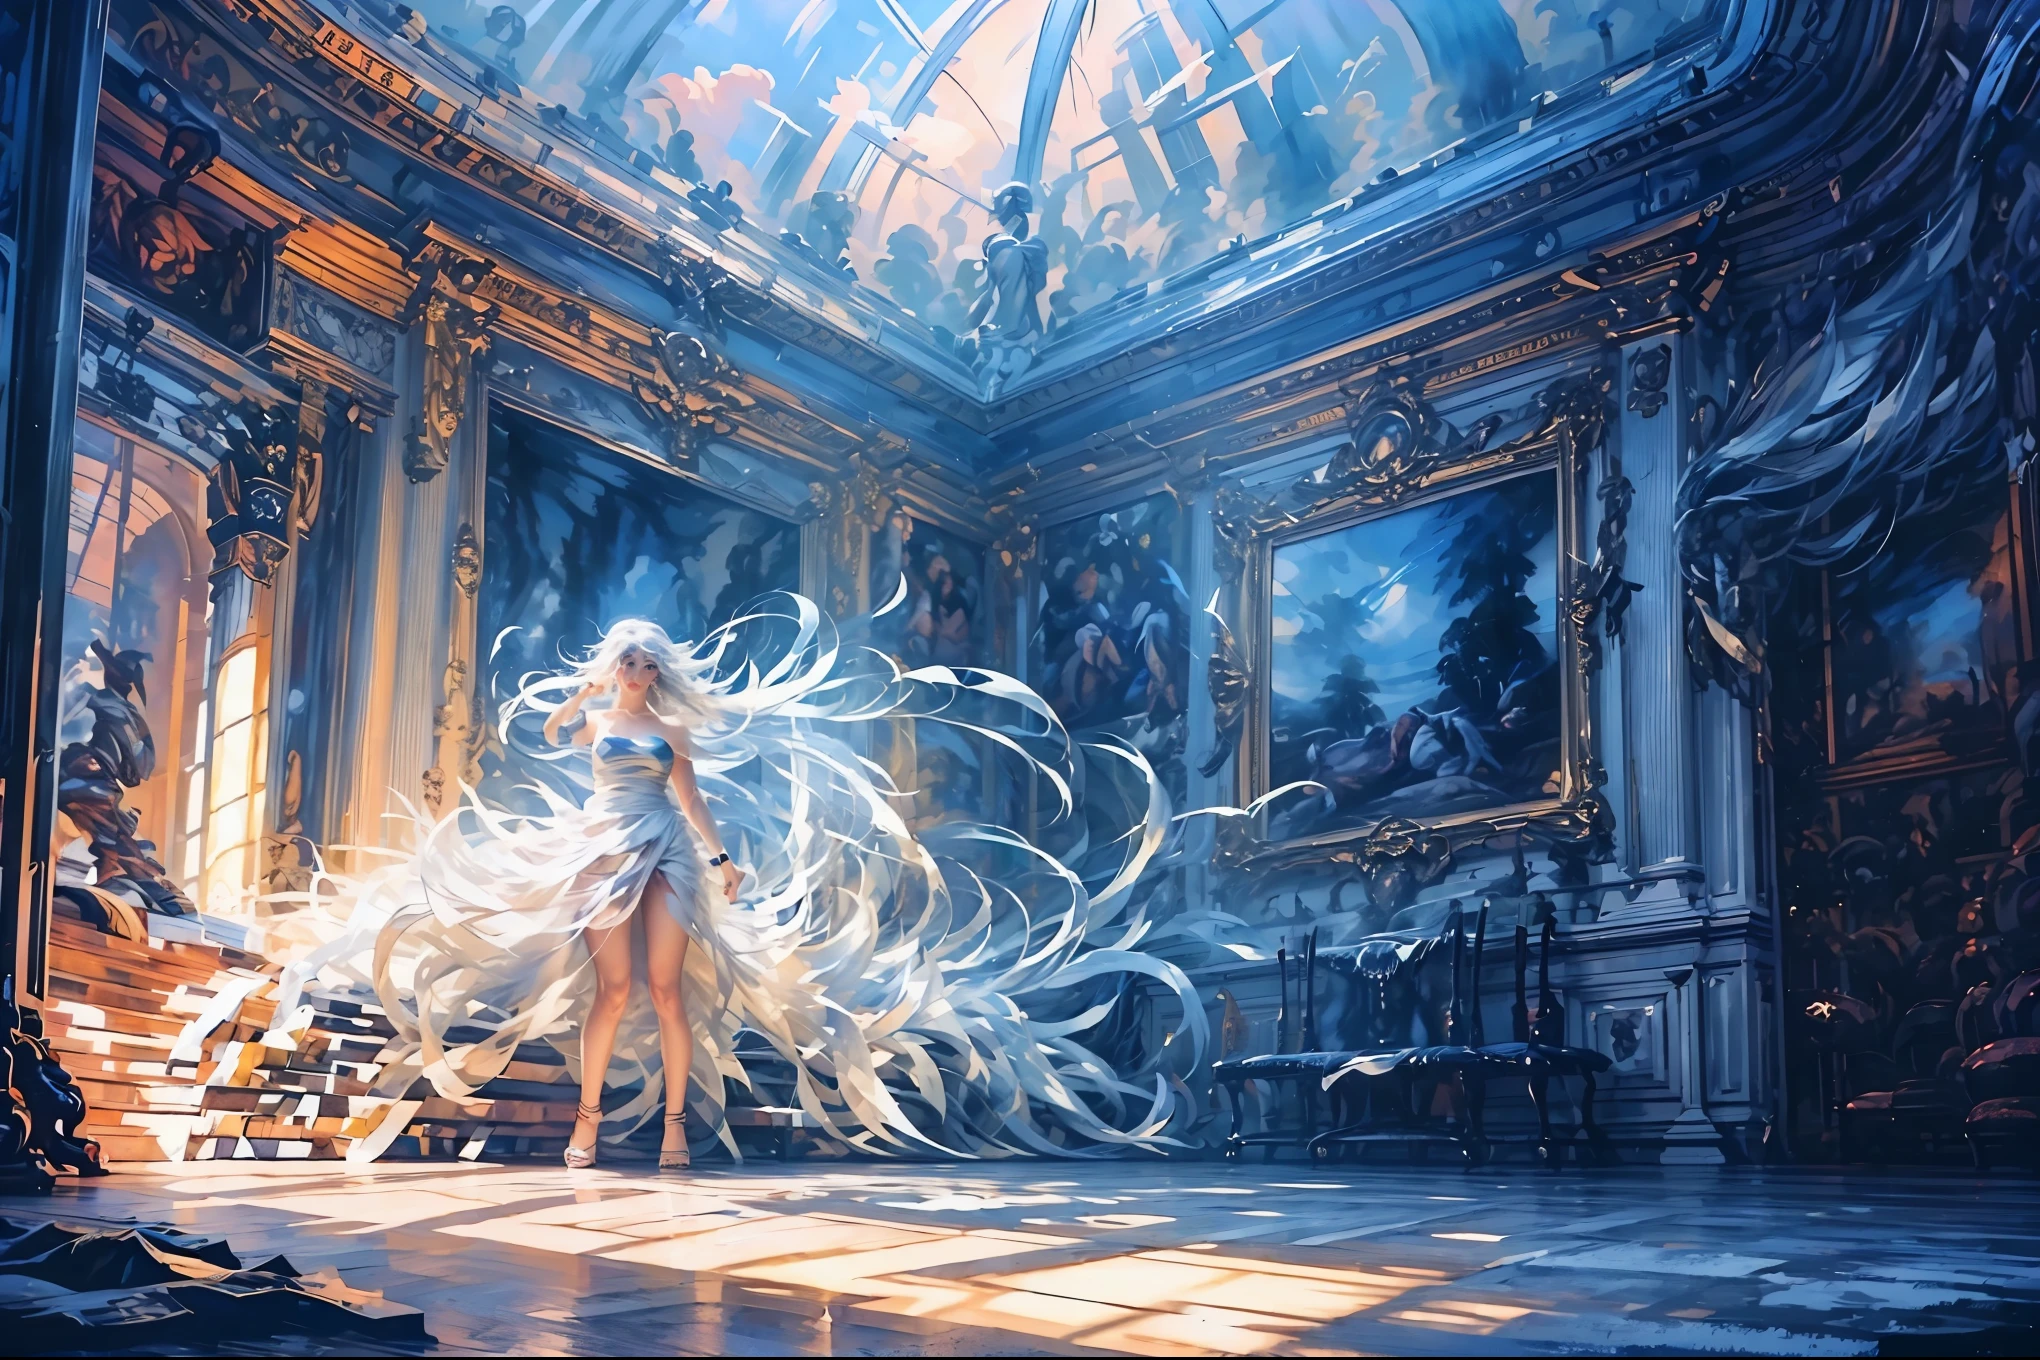 Photographic portrait, illustrated by guweiz style (1girl, 1girl inspired by akali, fluorescent violet eyes, "ice" animal ears, huge breasts, athletic, fit)(dominant look)(Icy hair, piercing sapphire eyes, slender yet strong physique, Wizard Robe: Icy blue robe adorned with intricate frost designs Majestic Slippers: Crystal-clear with shimmering ice accents Armor: Frost-imbued armor, resembling frozen fractals)(La determinacion de las nacidas del hielo)(Fondo complejo salan de negociación, ambiente viciado y profundo)(Photographic portrait: short medium shot height: chopped, luzflontal, iluminacion de estudio, guweiz style, (((masterpiece:1.2, best quality:1.2, beautiful, high quality, highres:1.1, aesthetic), highly detailed, extremely detailed, ((8k, watercolor, perfect lighting)) 